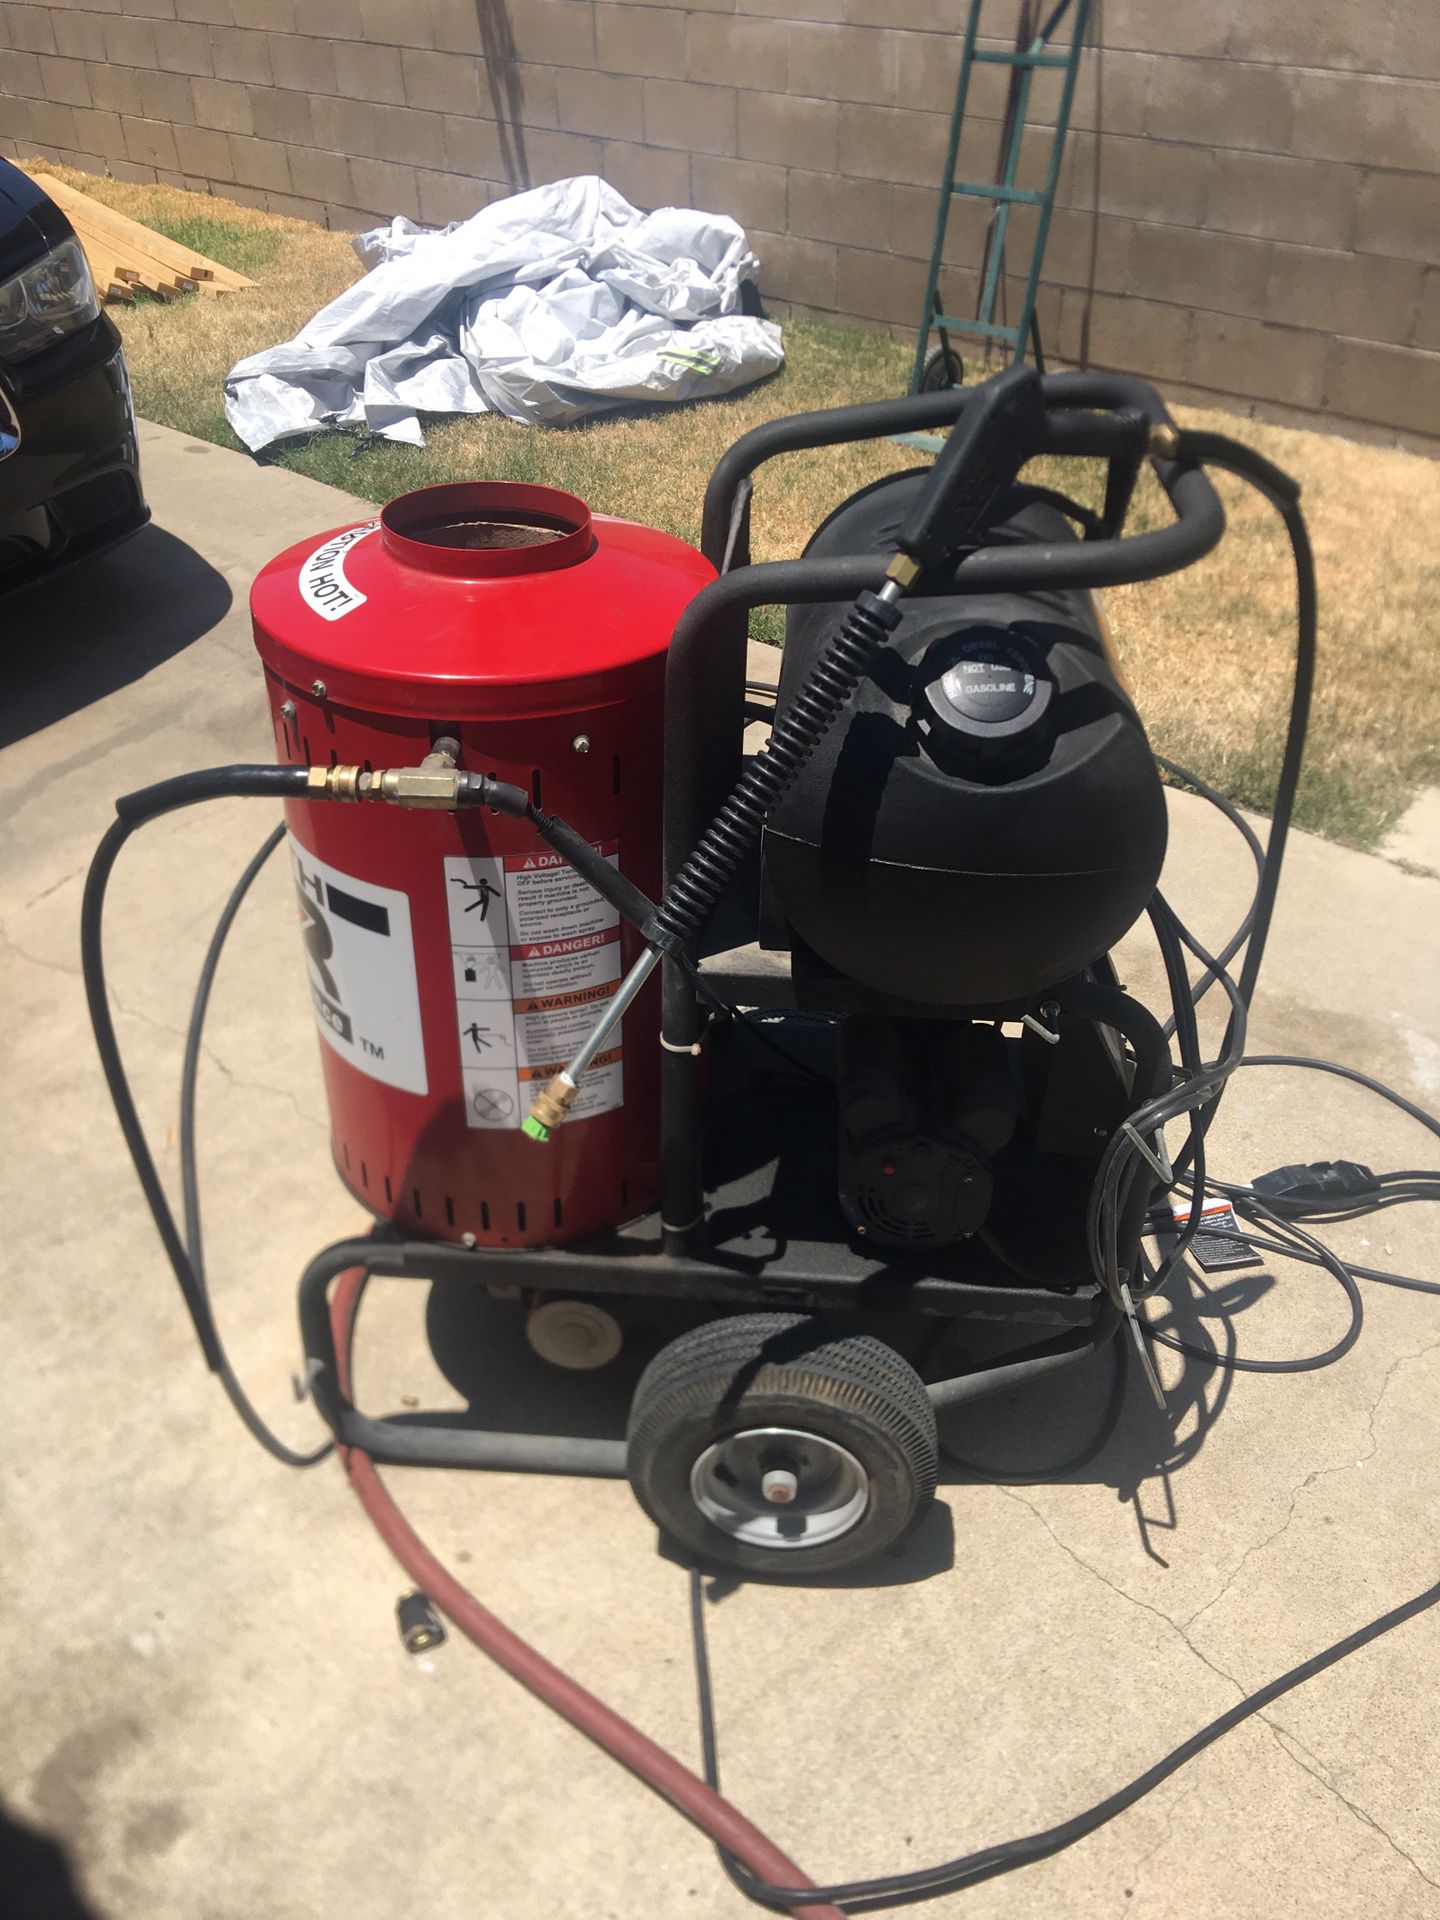 Shark Industrial Heated Pressure Washer for Sale in Bakersfield, CA -  OfferUp